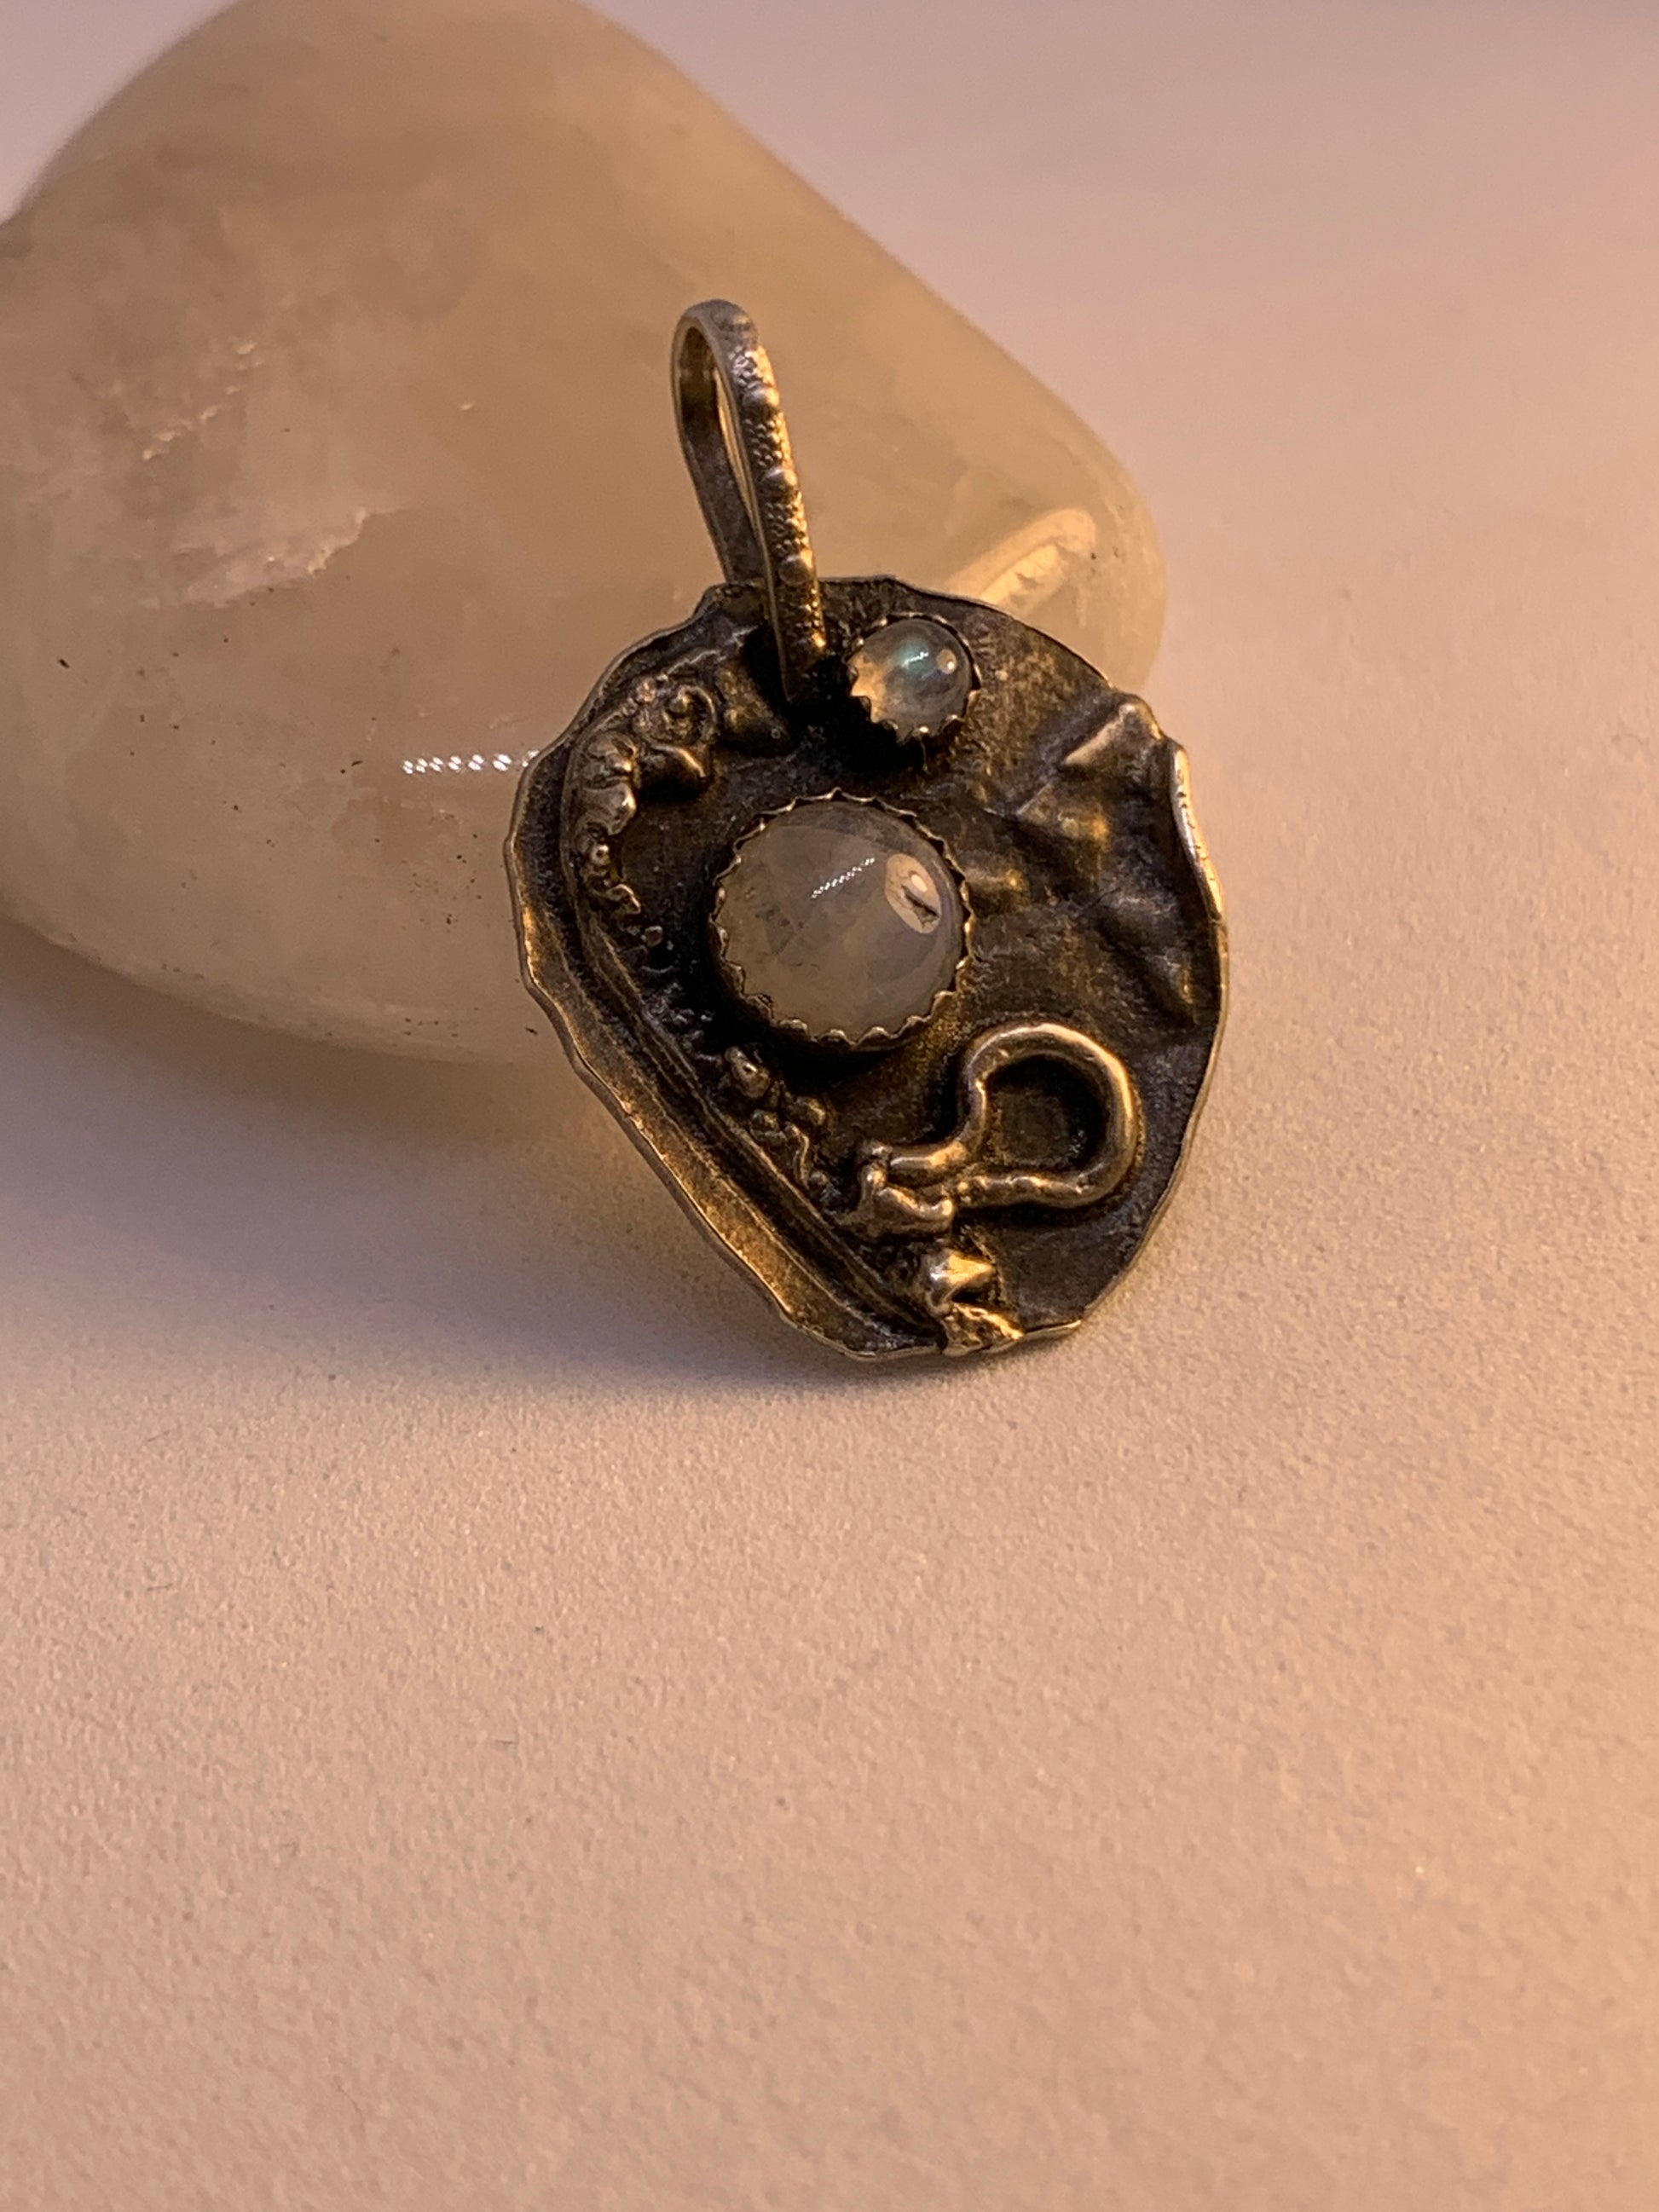 Unique Abstract Sterling Silver Pendant with Moonstone. This piece has been oxidized to bring out the texture. Every piece I make is unique and one of a kind. 